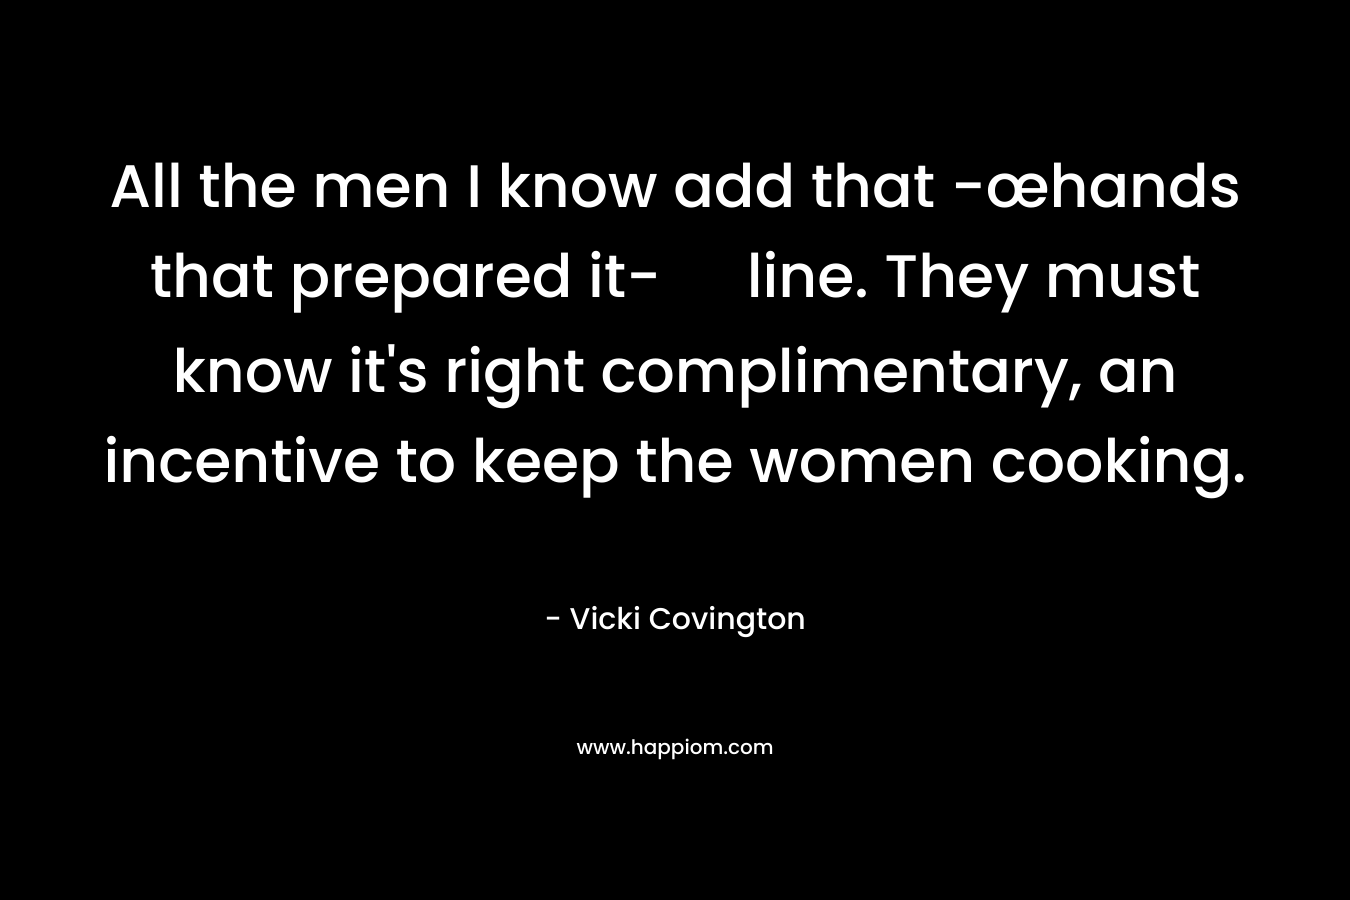 All the men I know add that -œhands that prepared it- line. They must know it’s right complimentary, an incentive to keep the women cooking. – Vicki Covington